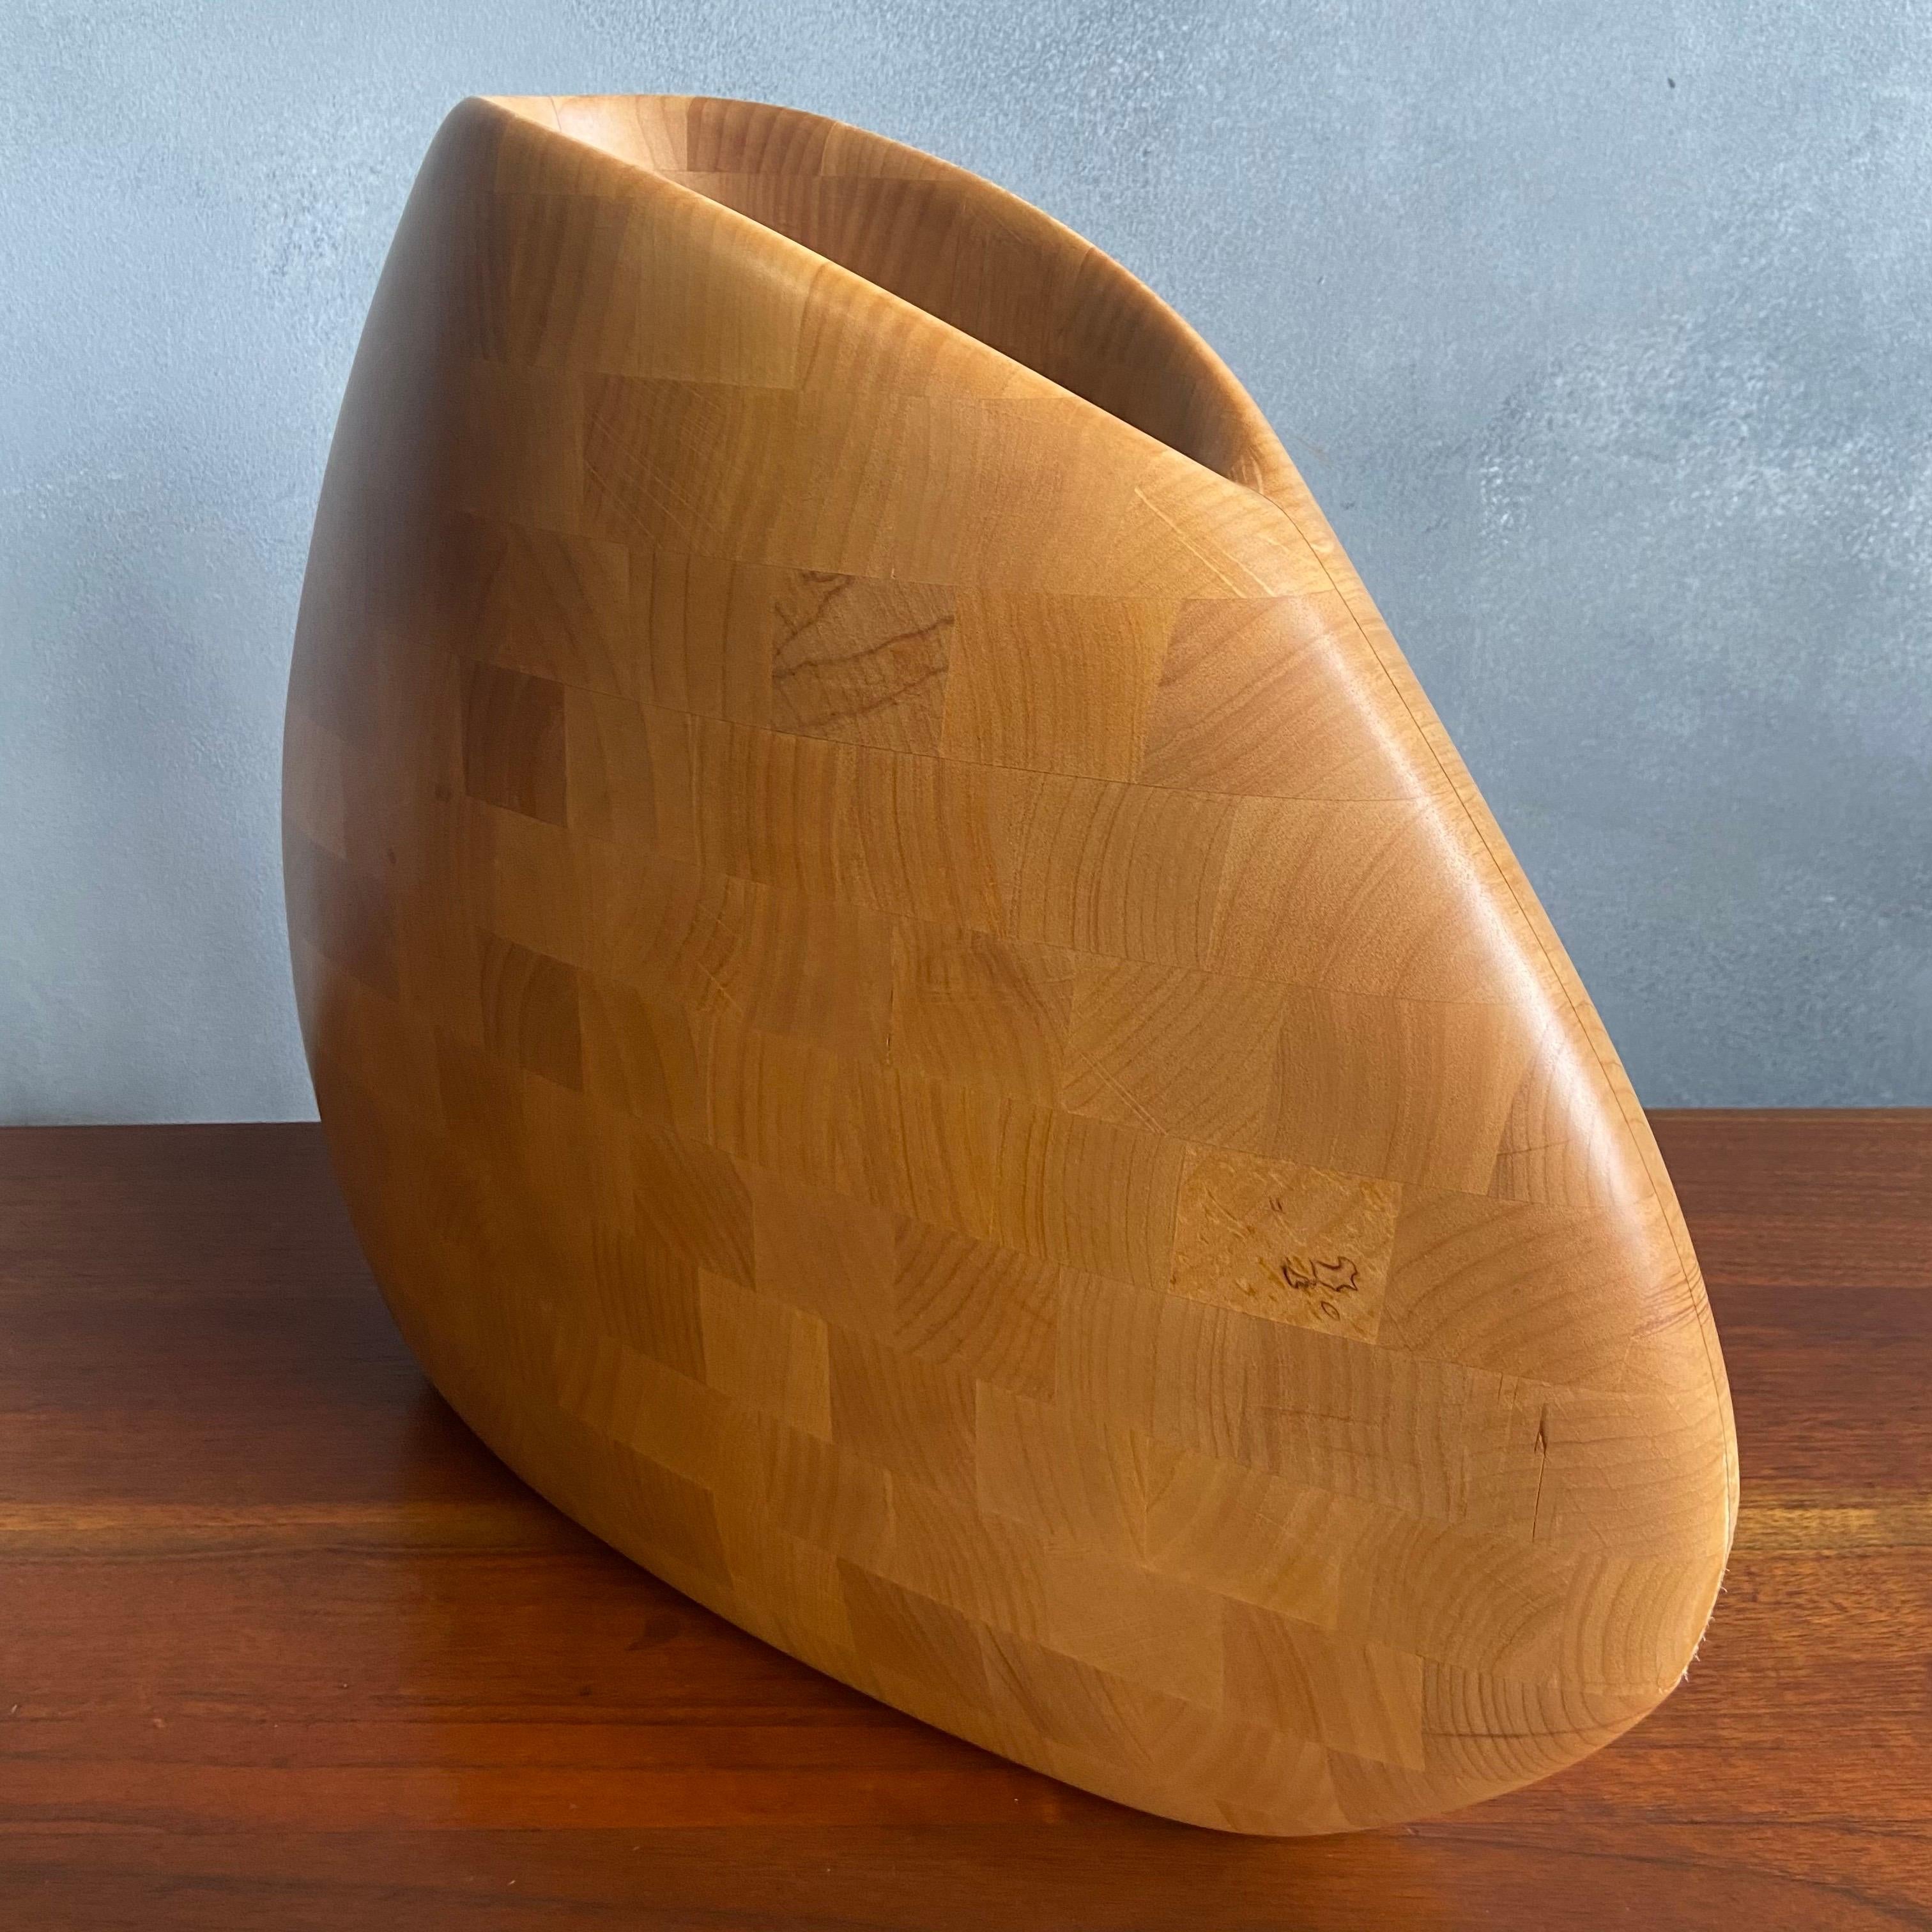 For your consideration is this beautifully sculpted vase by Master Craftsman Dean Santner. Santner designs are part of the American Modern Craft movement along side Wendell Castle, Nakashima, Phillip Powell to name a few. This hand sculpted piece